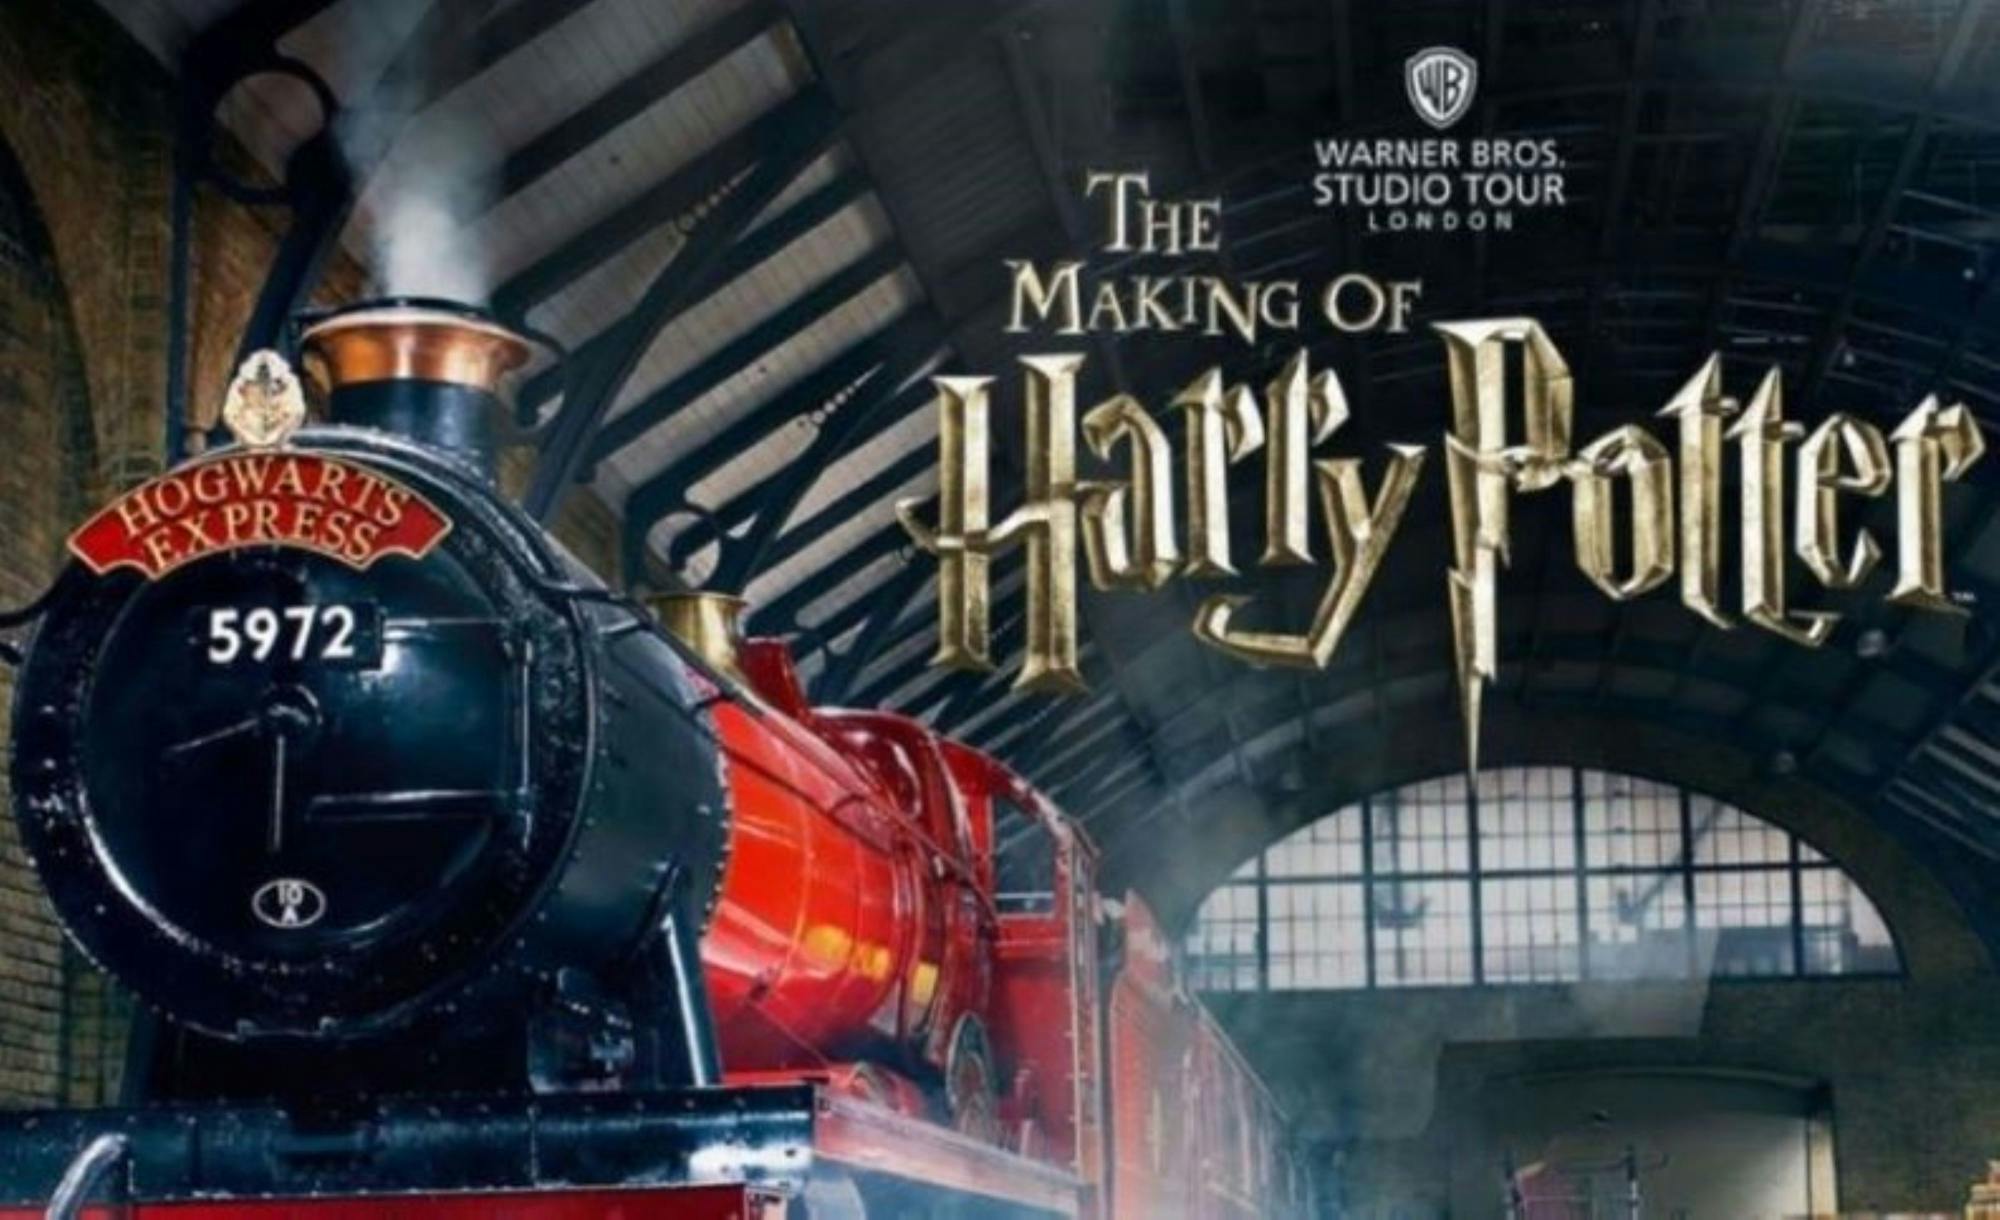 The Making of Harry Potter from Birmingham in Standard Premium Class